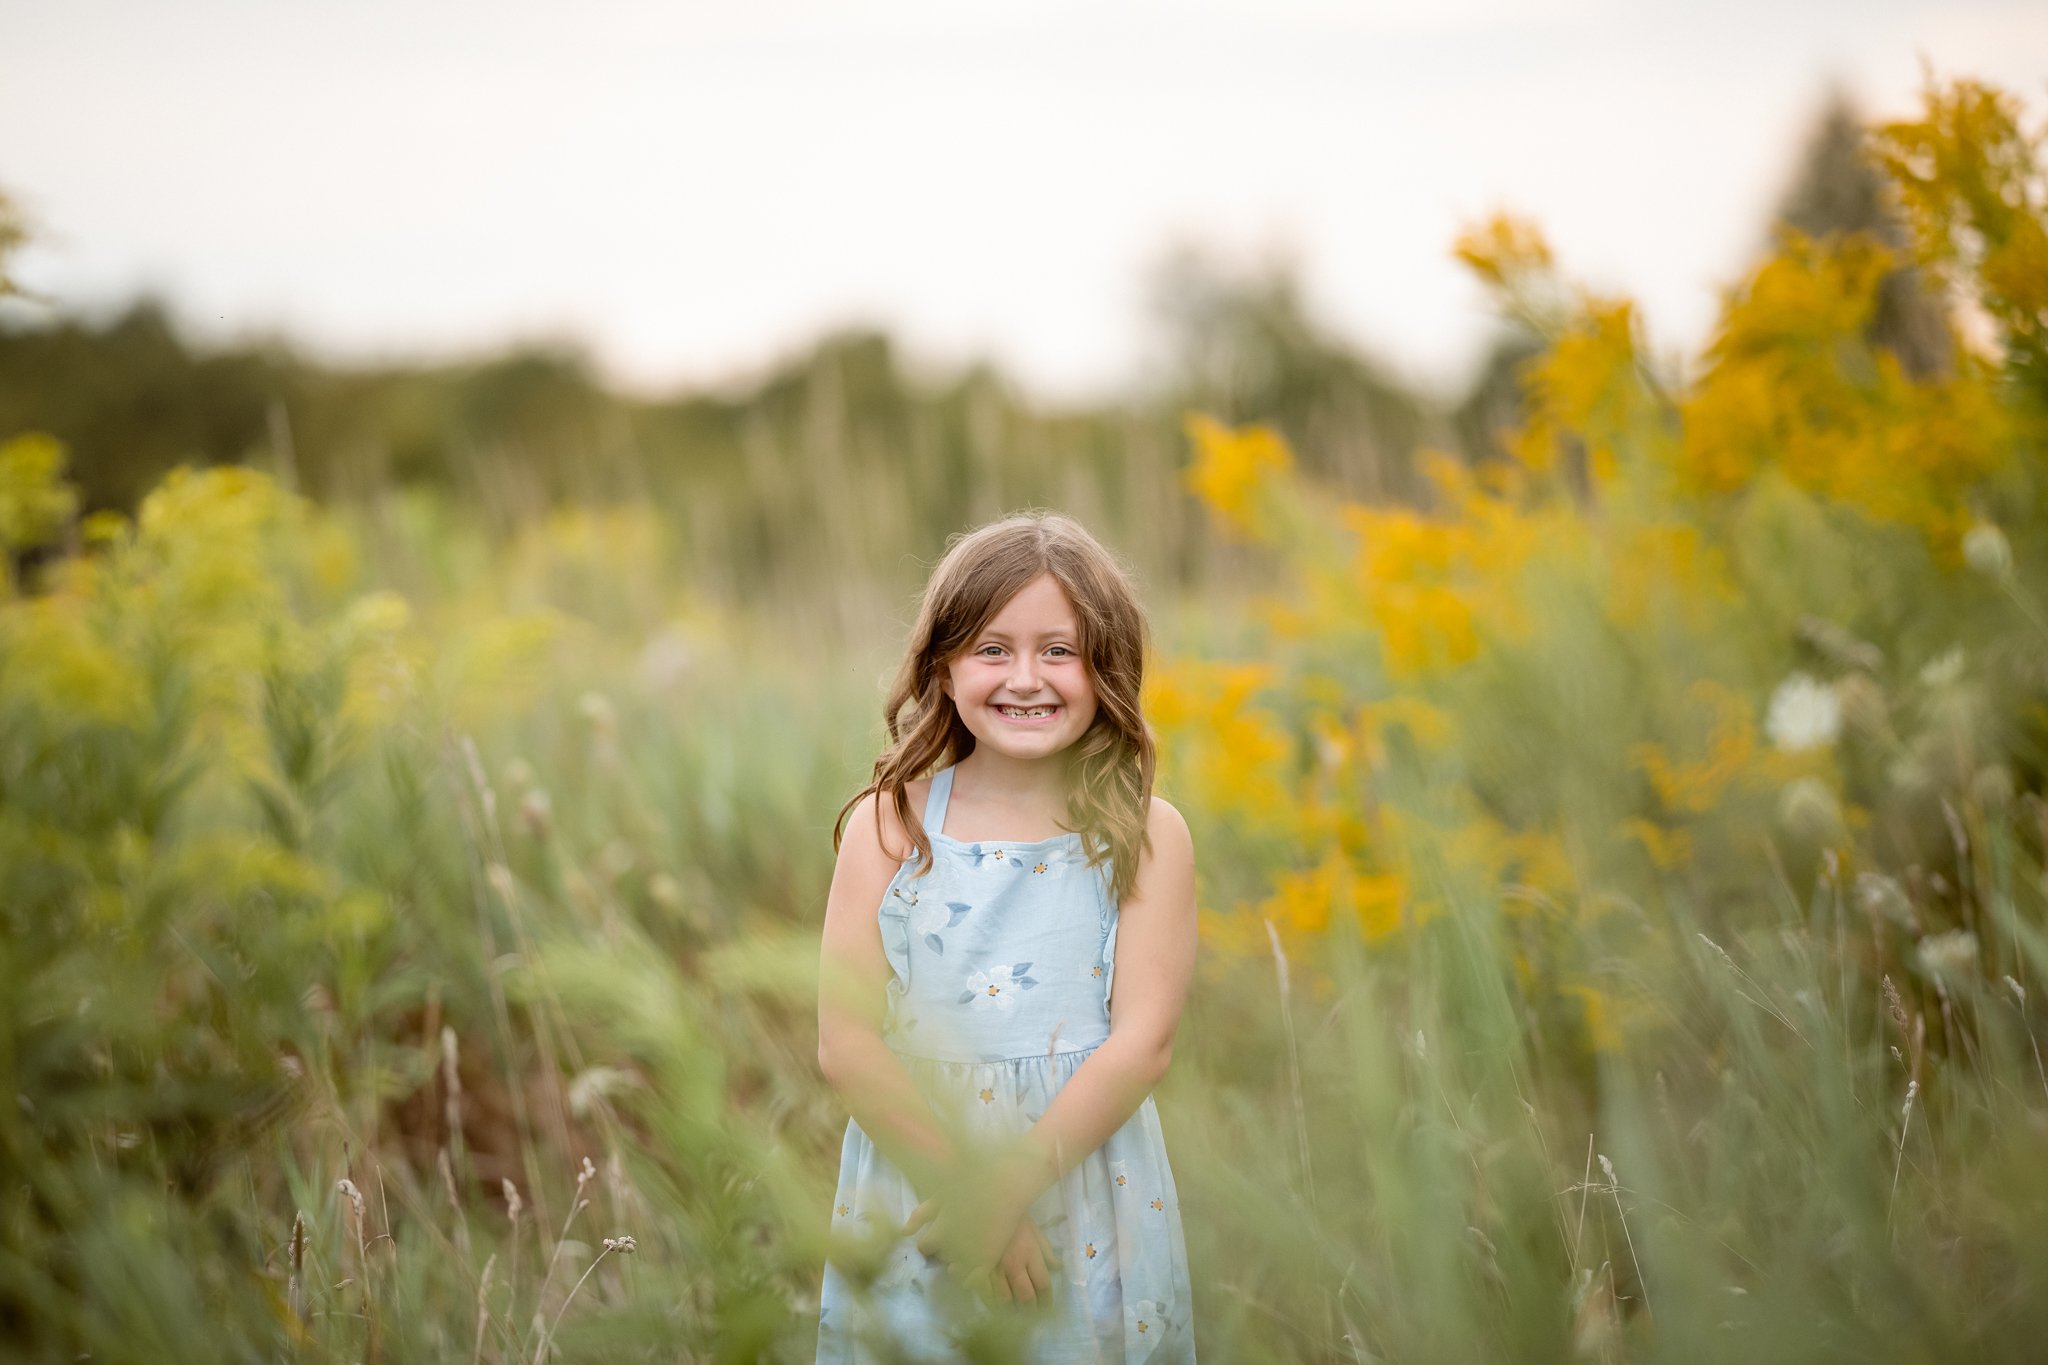 115 - MINI-SESSION- NAOMILUCIENNE - 20210827 - 1740 - Field and Flowers - Armstrong.jpg